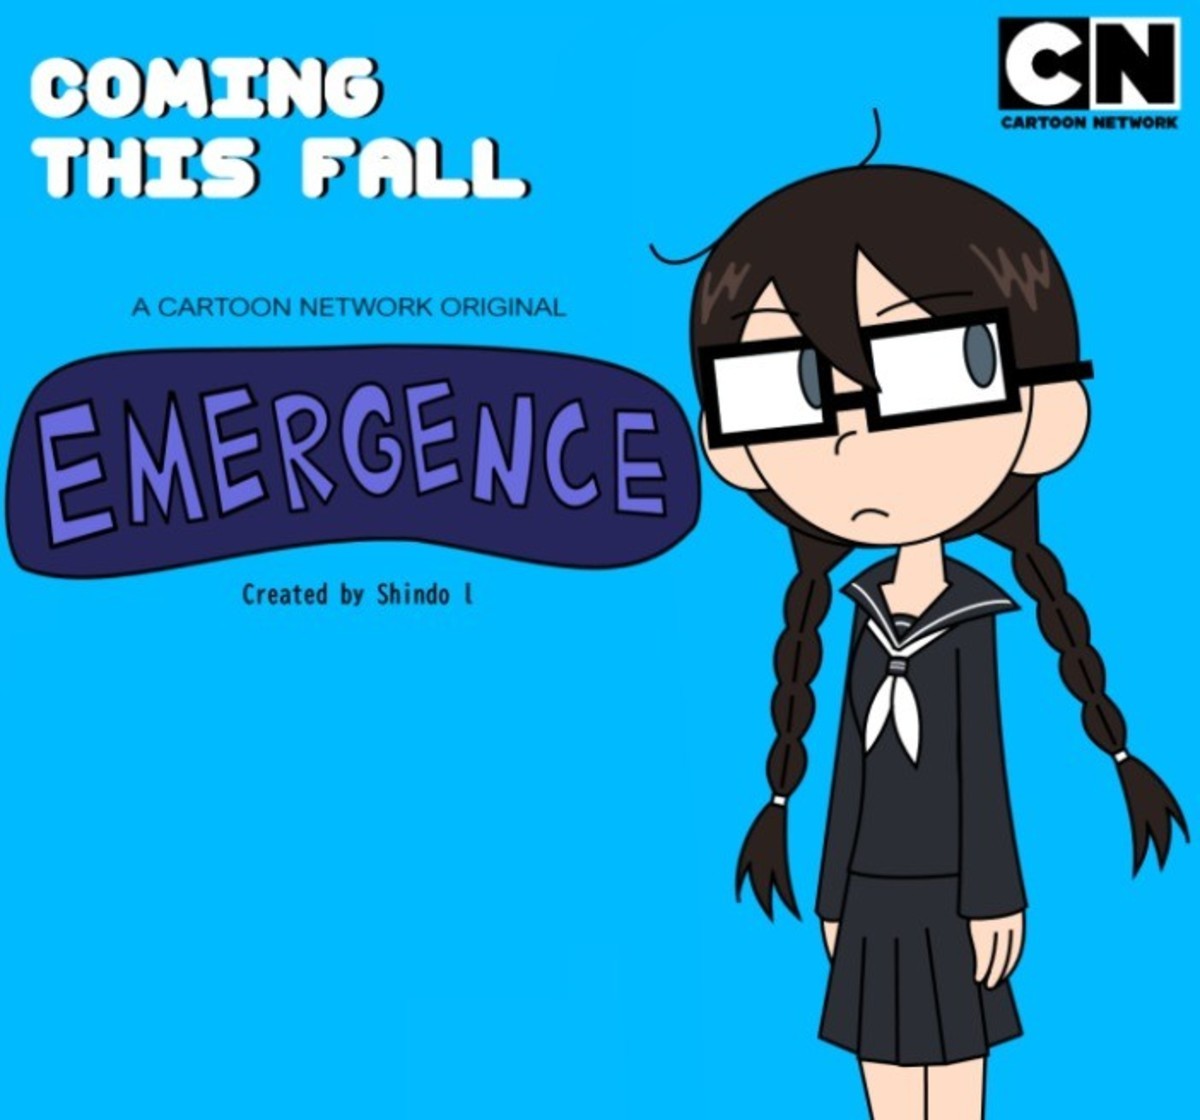 Brand new show on Cartoon Network! I wonder what it is?